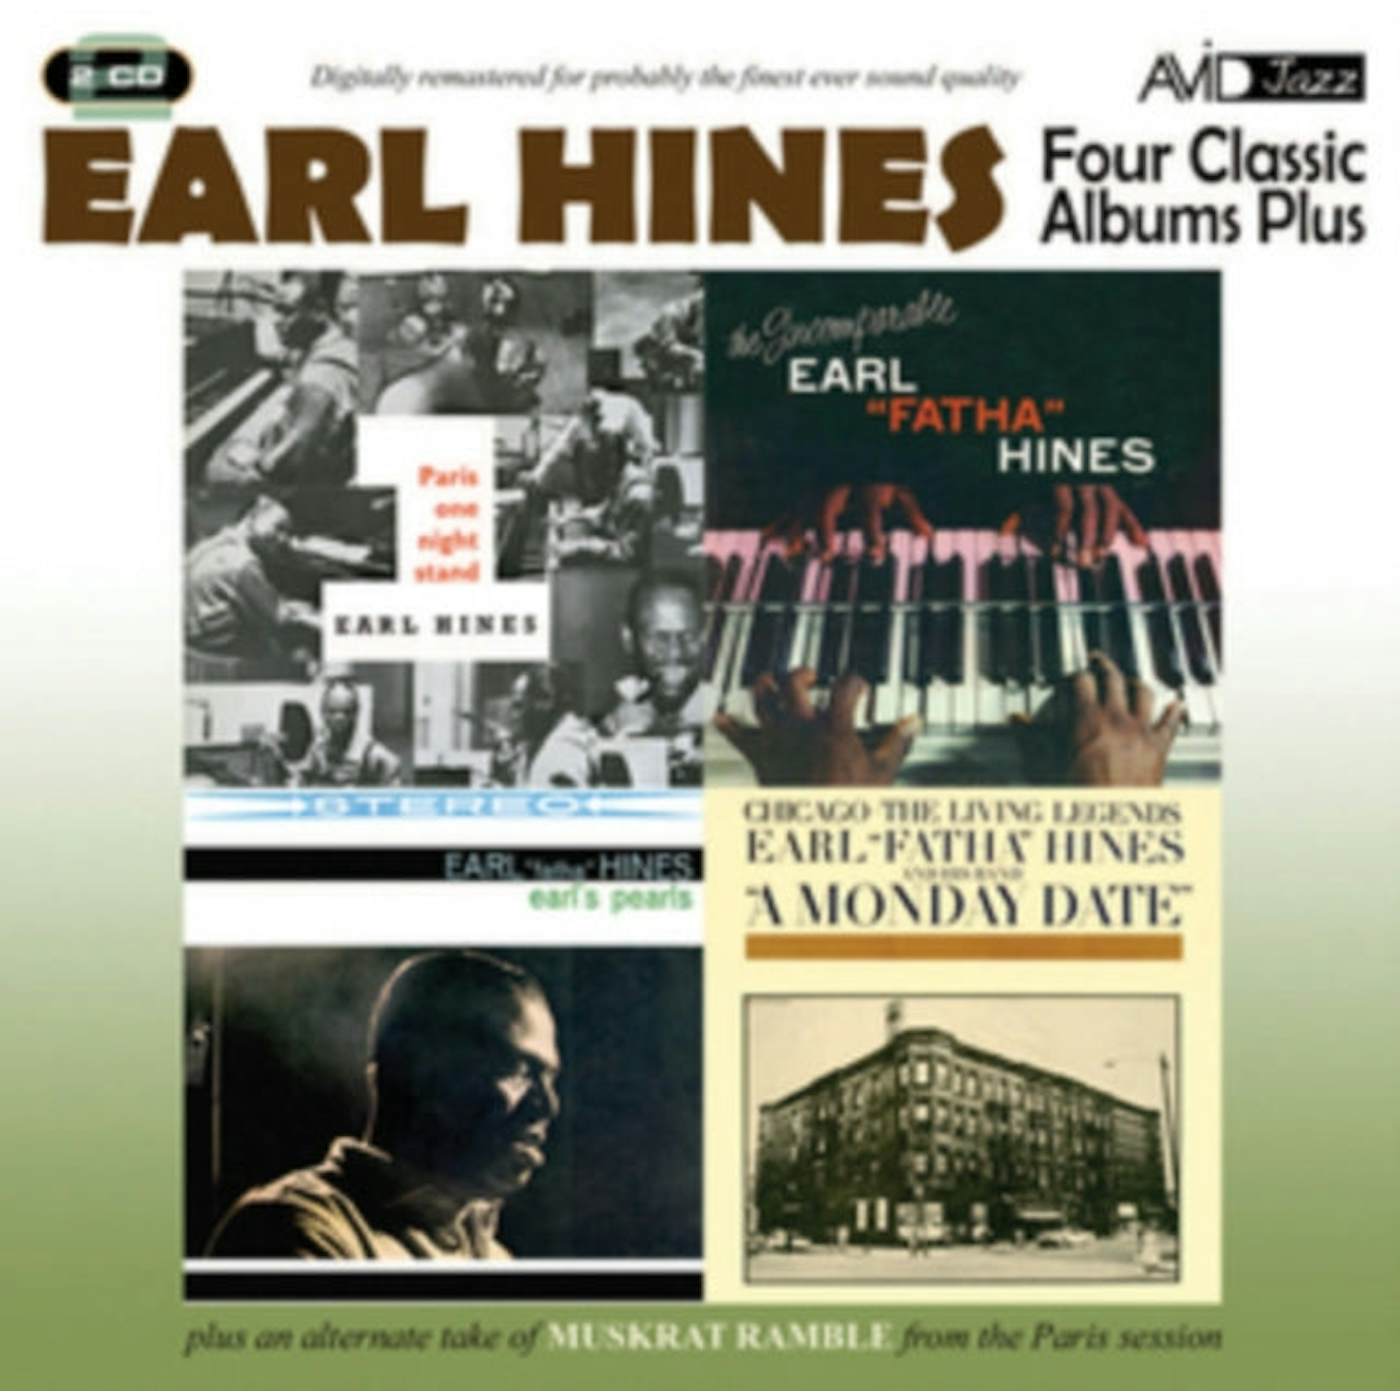 Earl Hines CD - Four Classic Albums